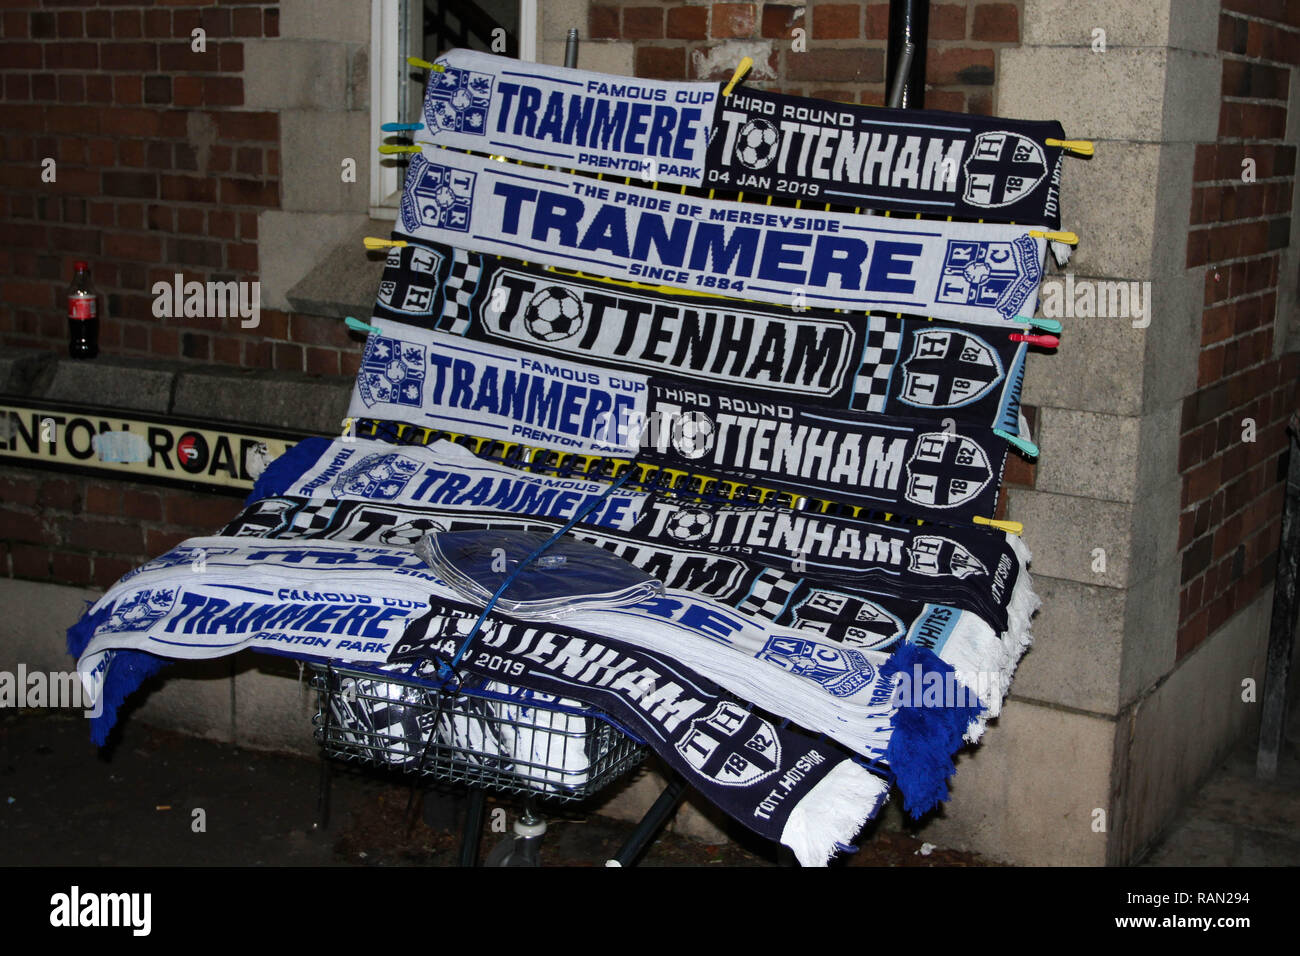 Birkenhead, UK. 4th January, 2019. Unofficial merchandise including half and half scarves on sale outside the stadium during the FA Cup Third Round match between Tranmere Rovers and Tottenham Hotspur at Prenton Park on January 4th 2019 in Birkenhead, England. Credit: PHC Images/Alamy Live News Stock Photo